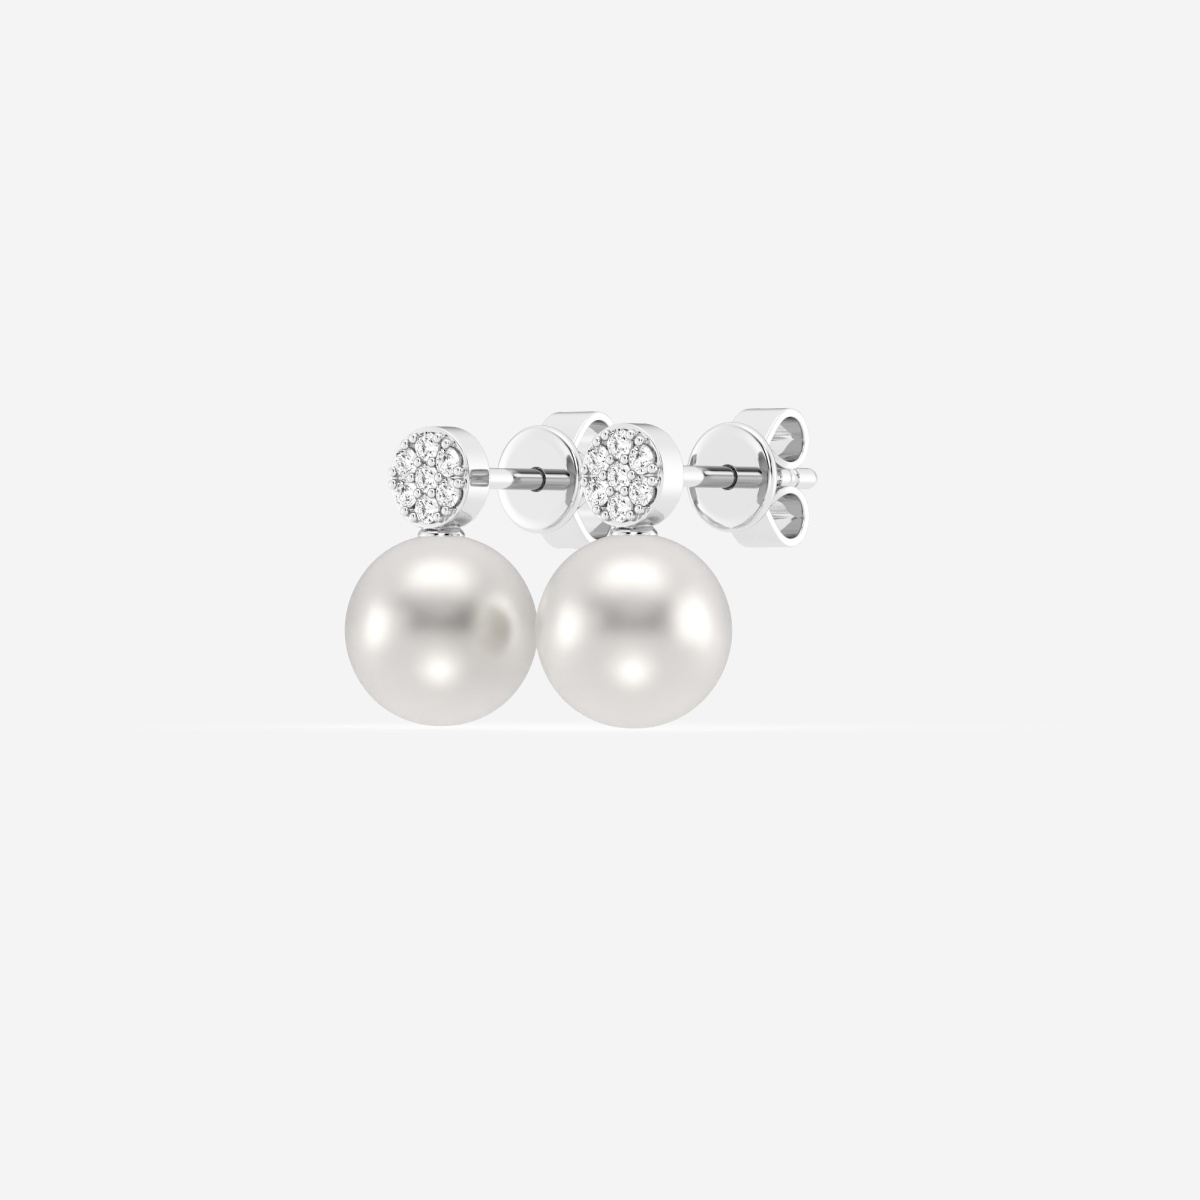 Additional Image 1 for  7.5 - 8.0 mm Cultured Freshwater Pearl and 1/10 ctw Lab Grown Diamond Stud Earrings